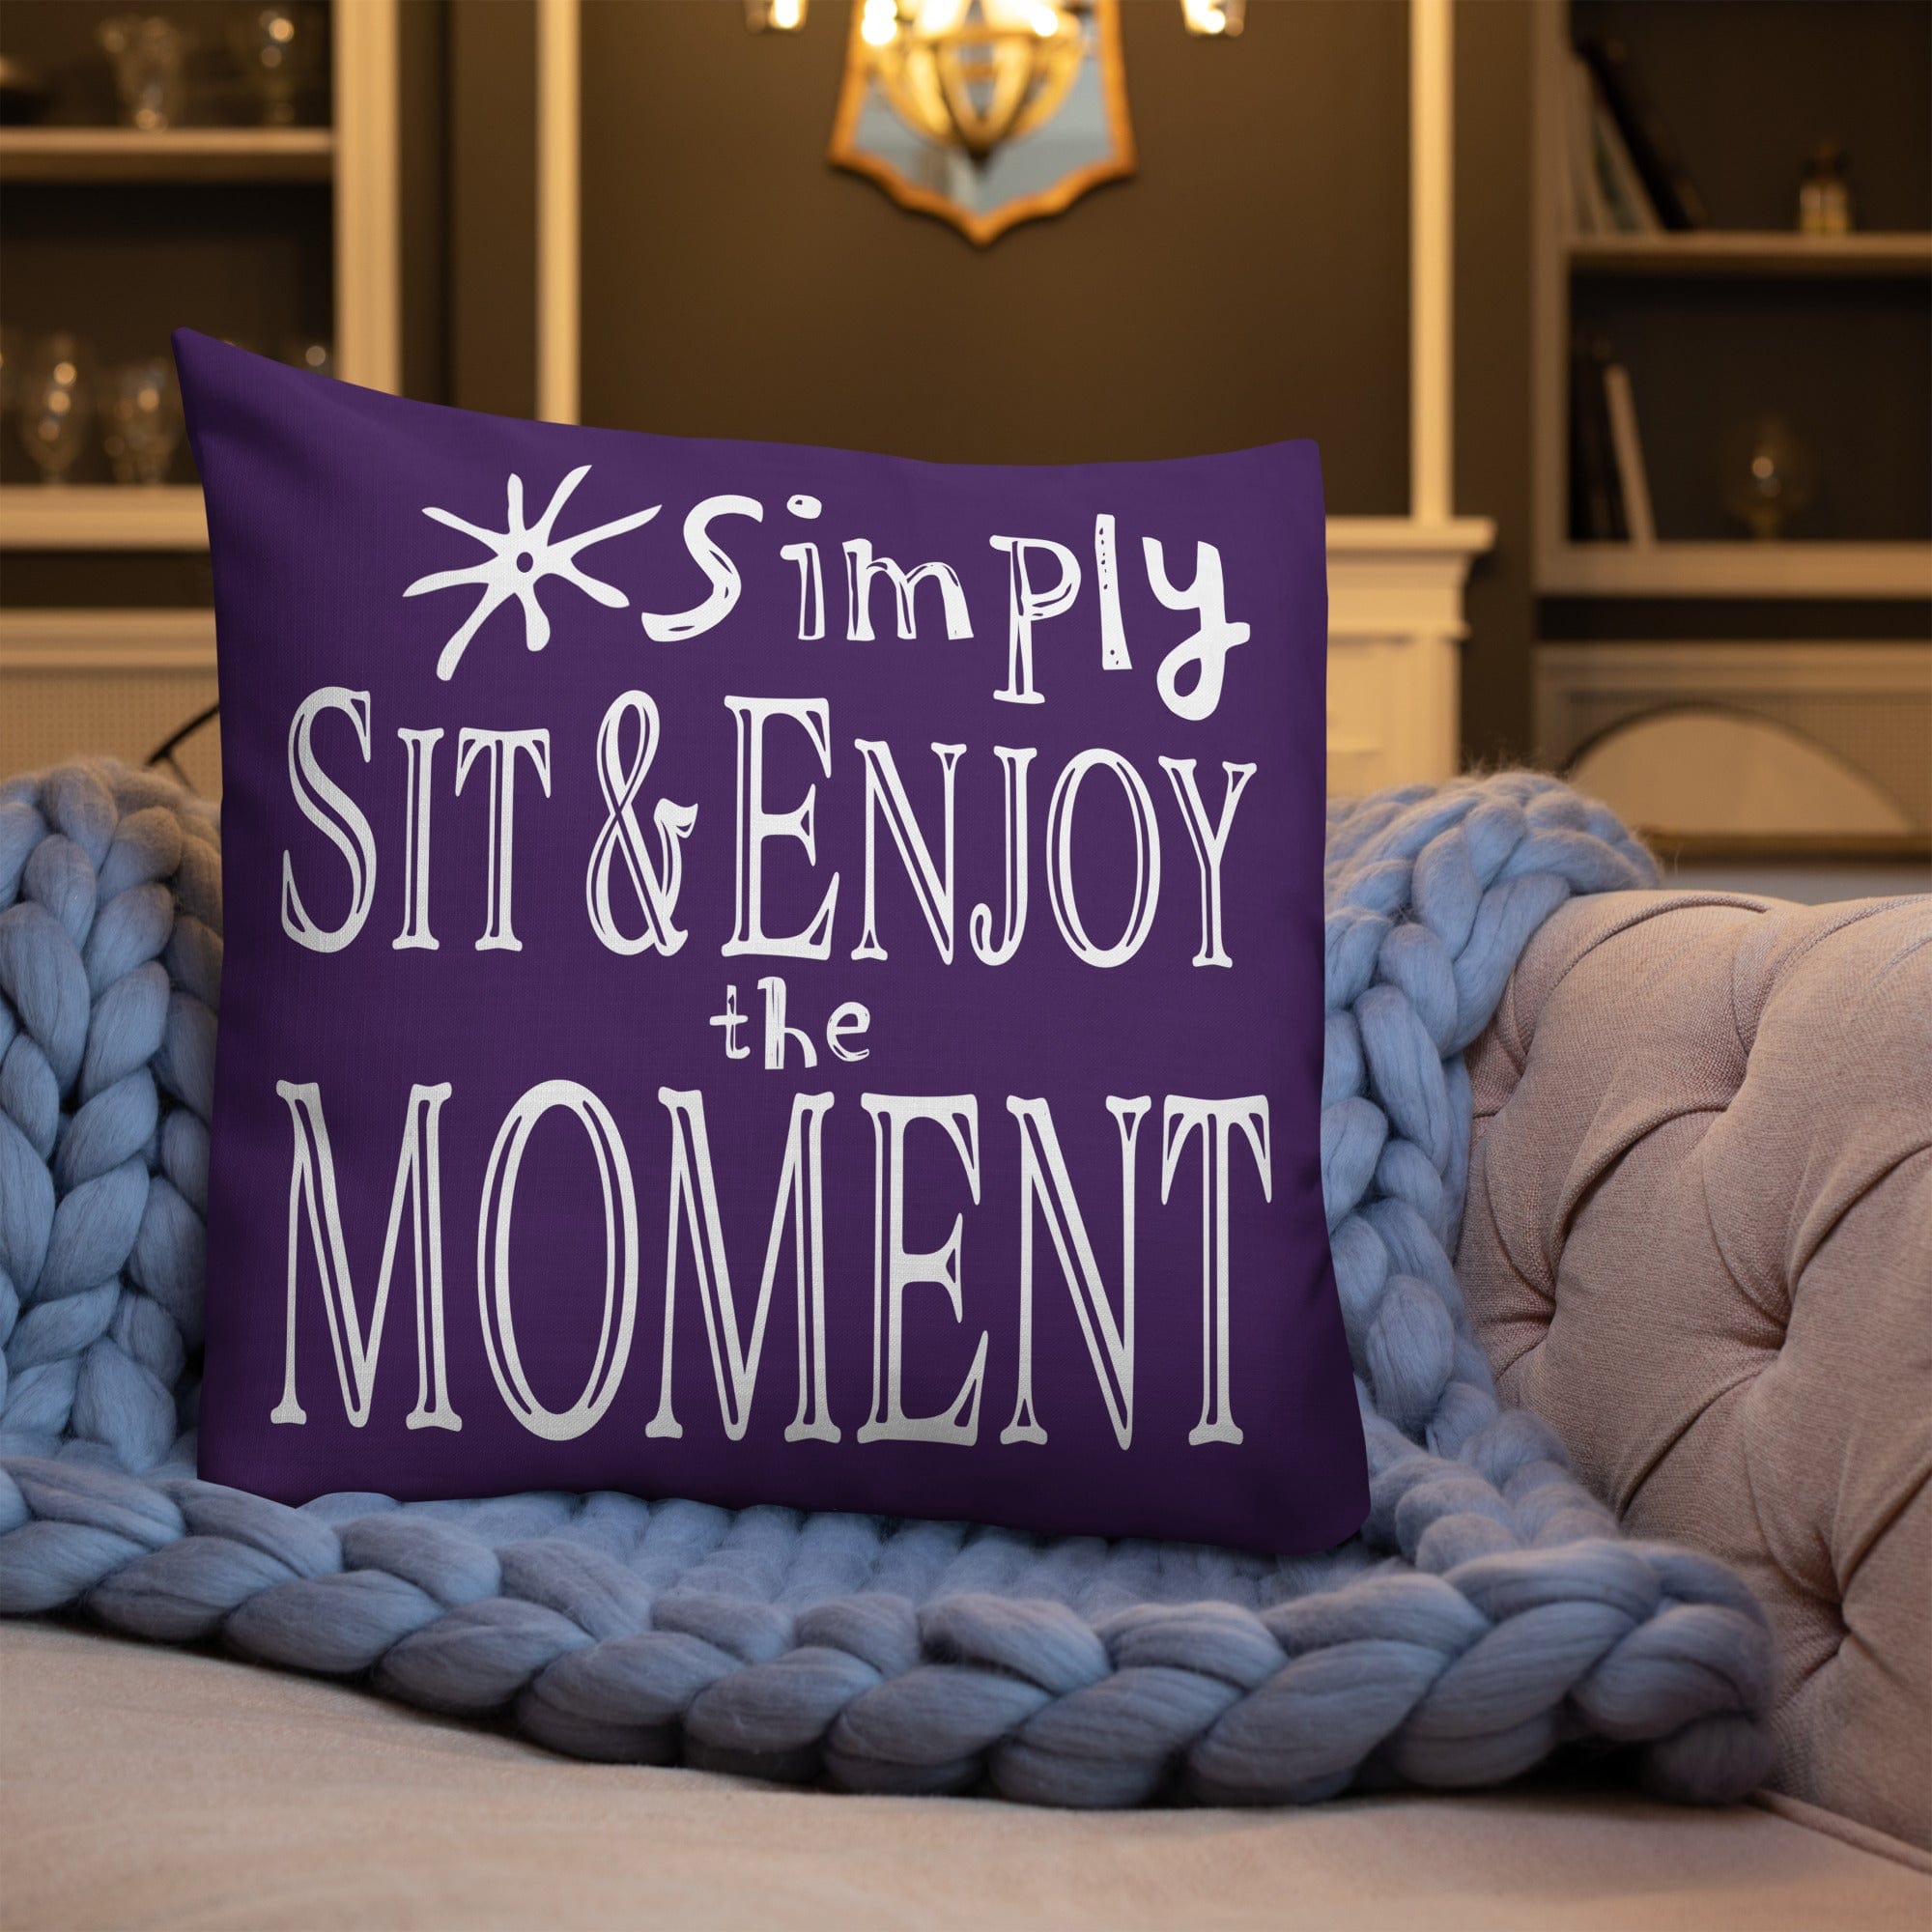 Simply Sit & Enjoy the Moment Mindfulness Decorative Pillow - Purple Throw Pillows A Moment Of Now Women’s Boutique Clothing Online Lifestyle Store